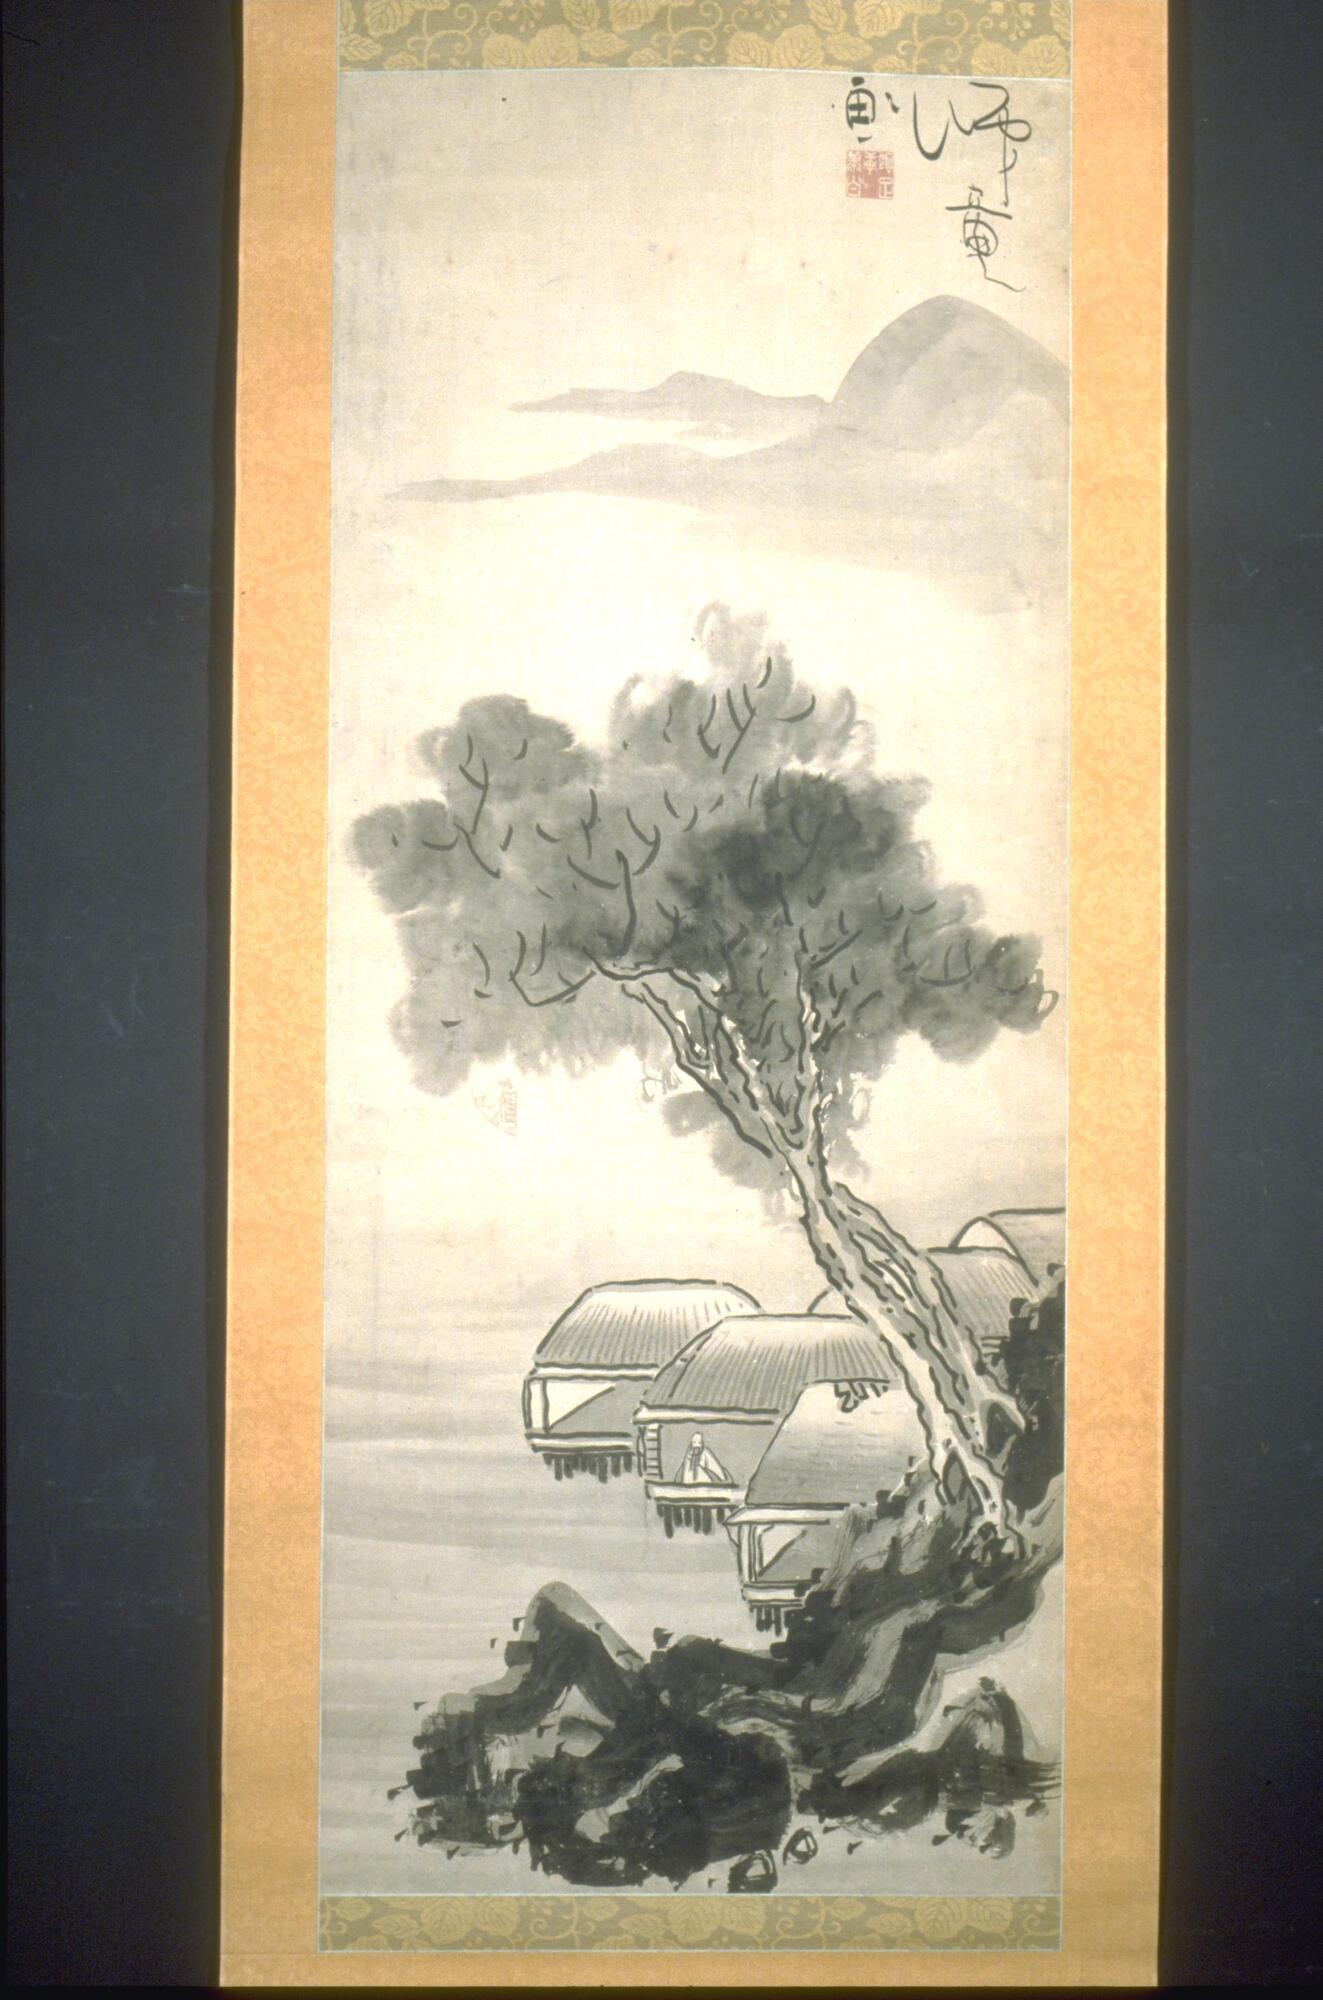 This hanging scroll depicts a scholar seated in a pavillion built into a mountainous landscape overlooking a bay. In the foreground, dark rocks rise up from the water to the right, while two large trees extend out over the water. Behind this is a series of five structures with a single figure inside, gazing out over the water. In the background, mist and mountains are suggested through the use of a lighter gray ink wash. 